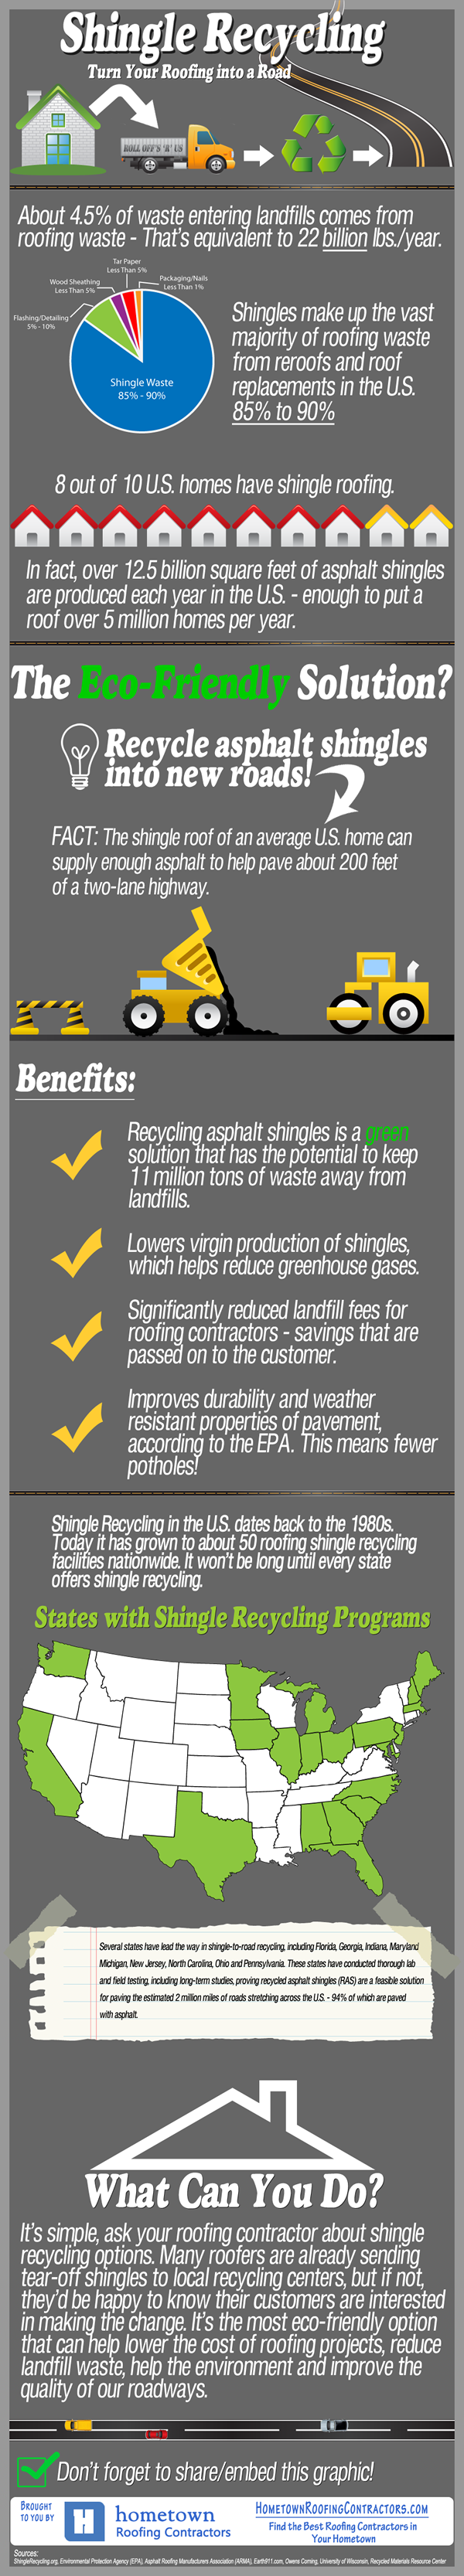 roof shingle recycling infographic